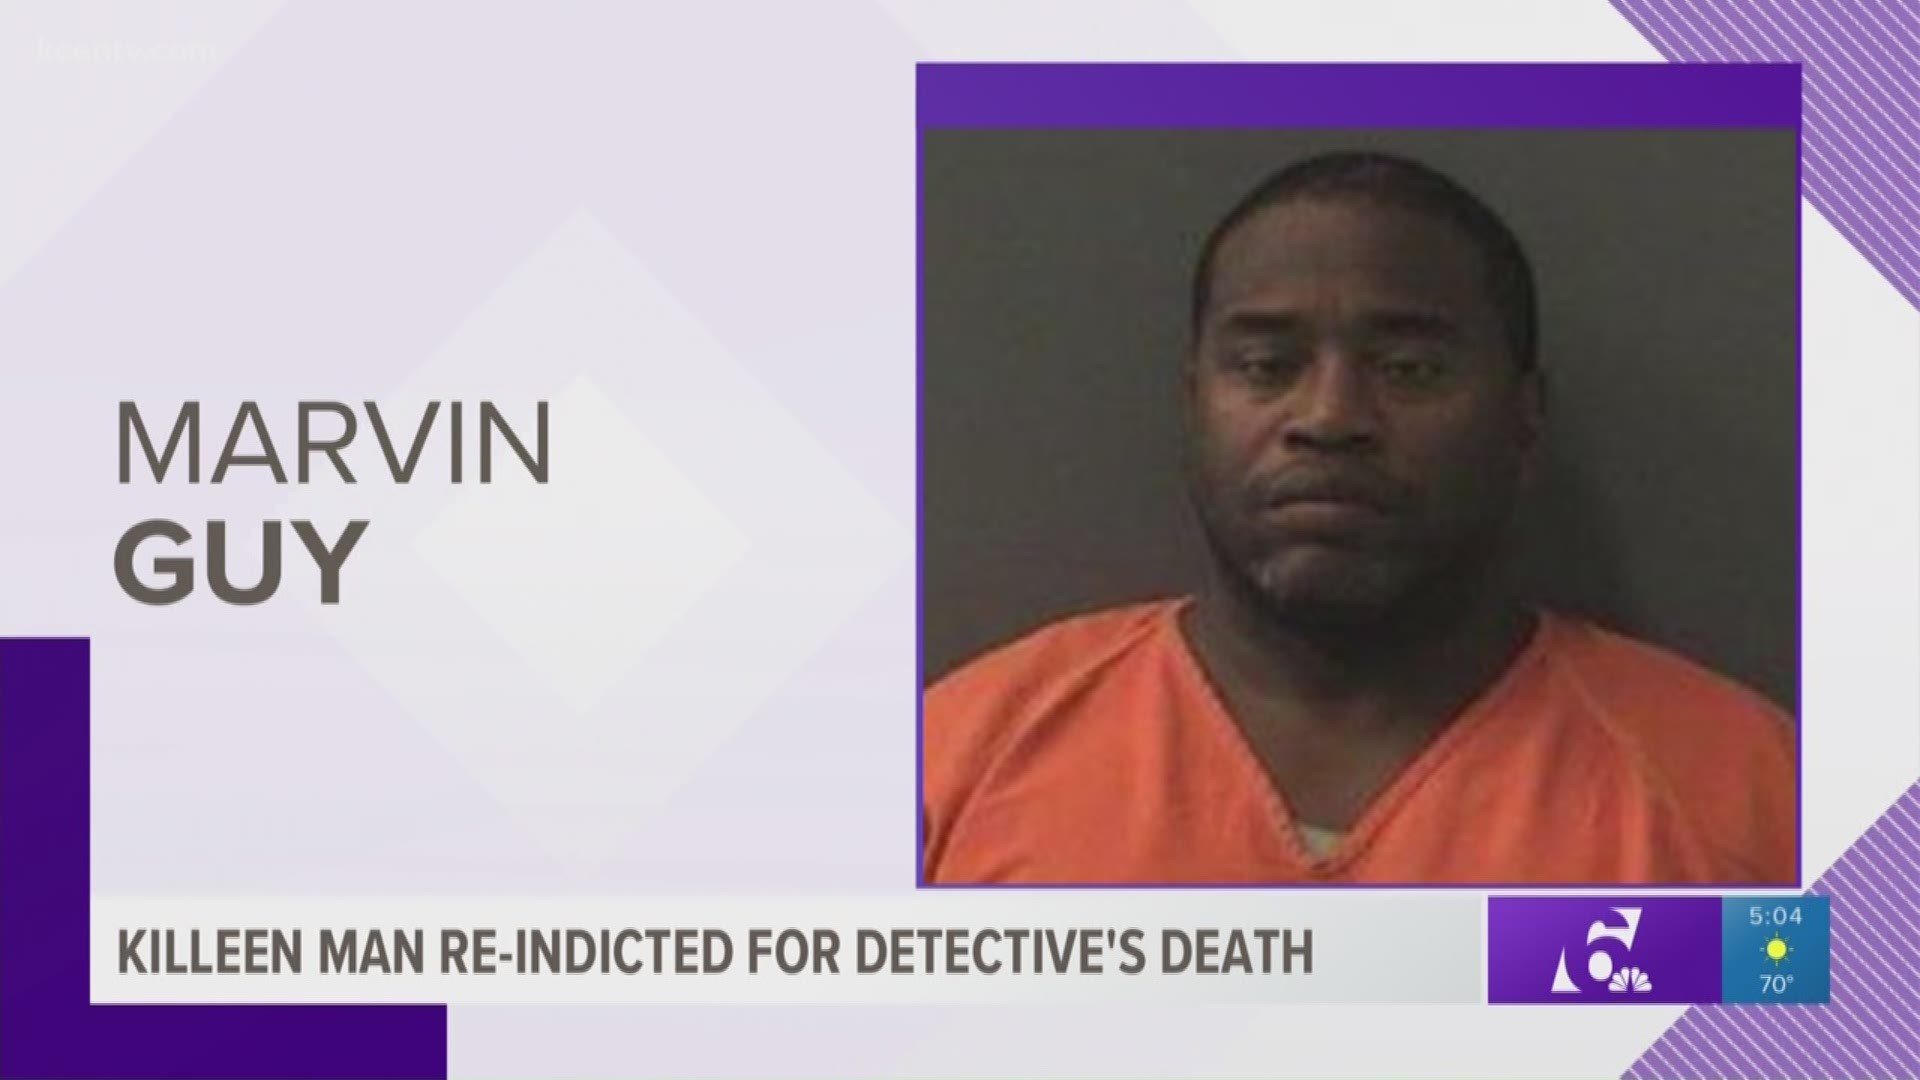 Marvin Guy is accused of shooting Detective Charles Dinwiddie to death in 2014 while the detective served a warrant for Guy's arrest.